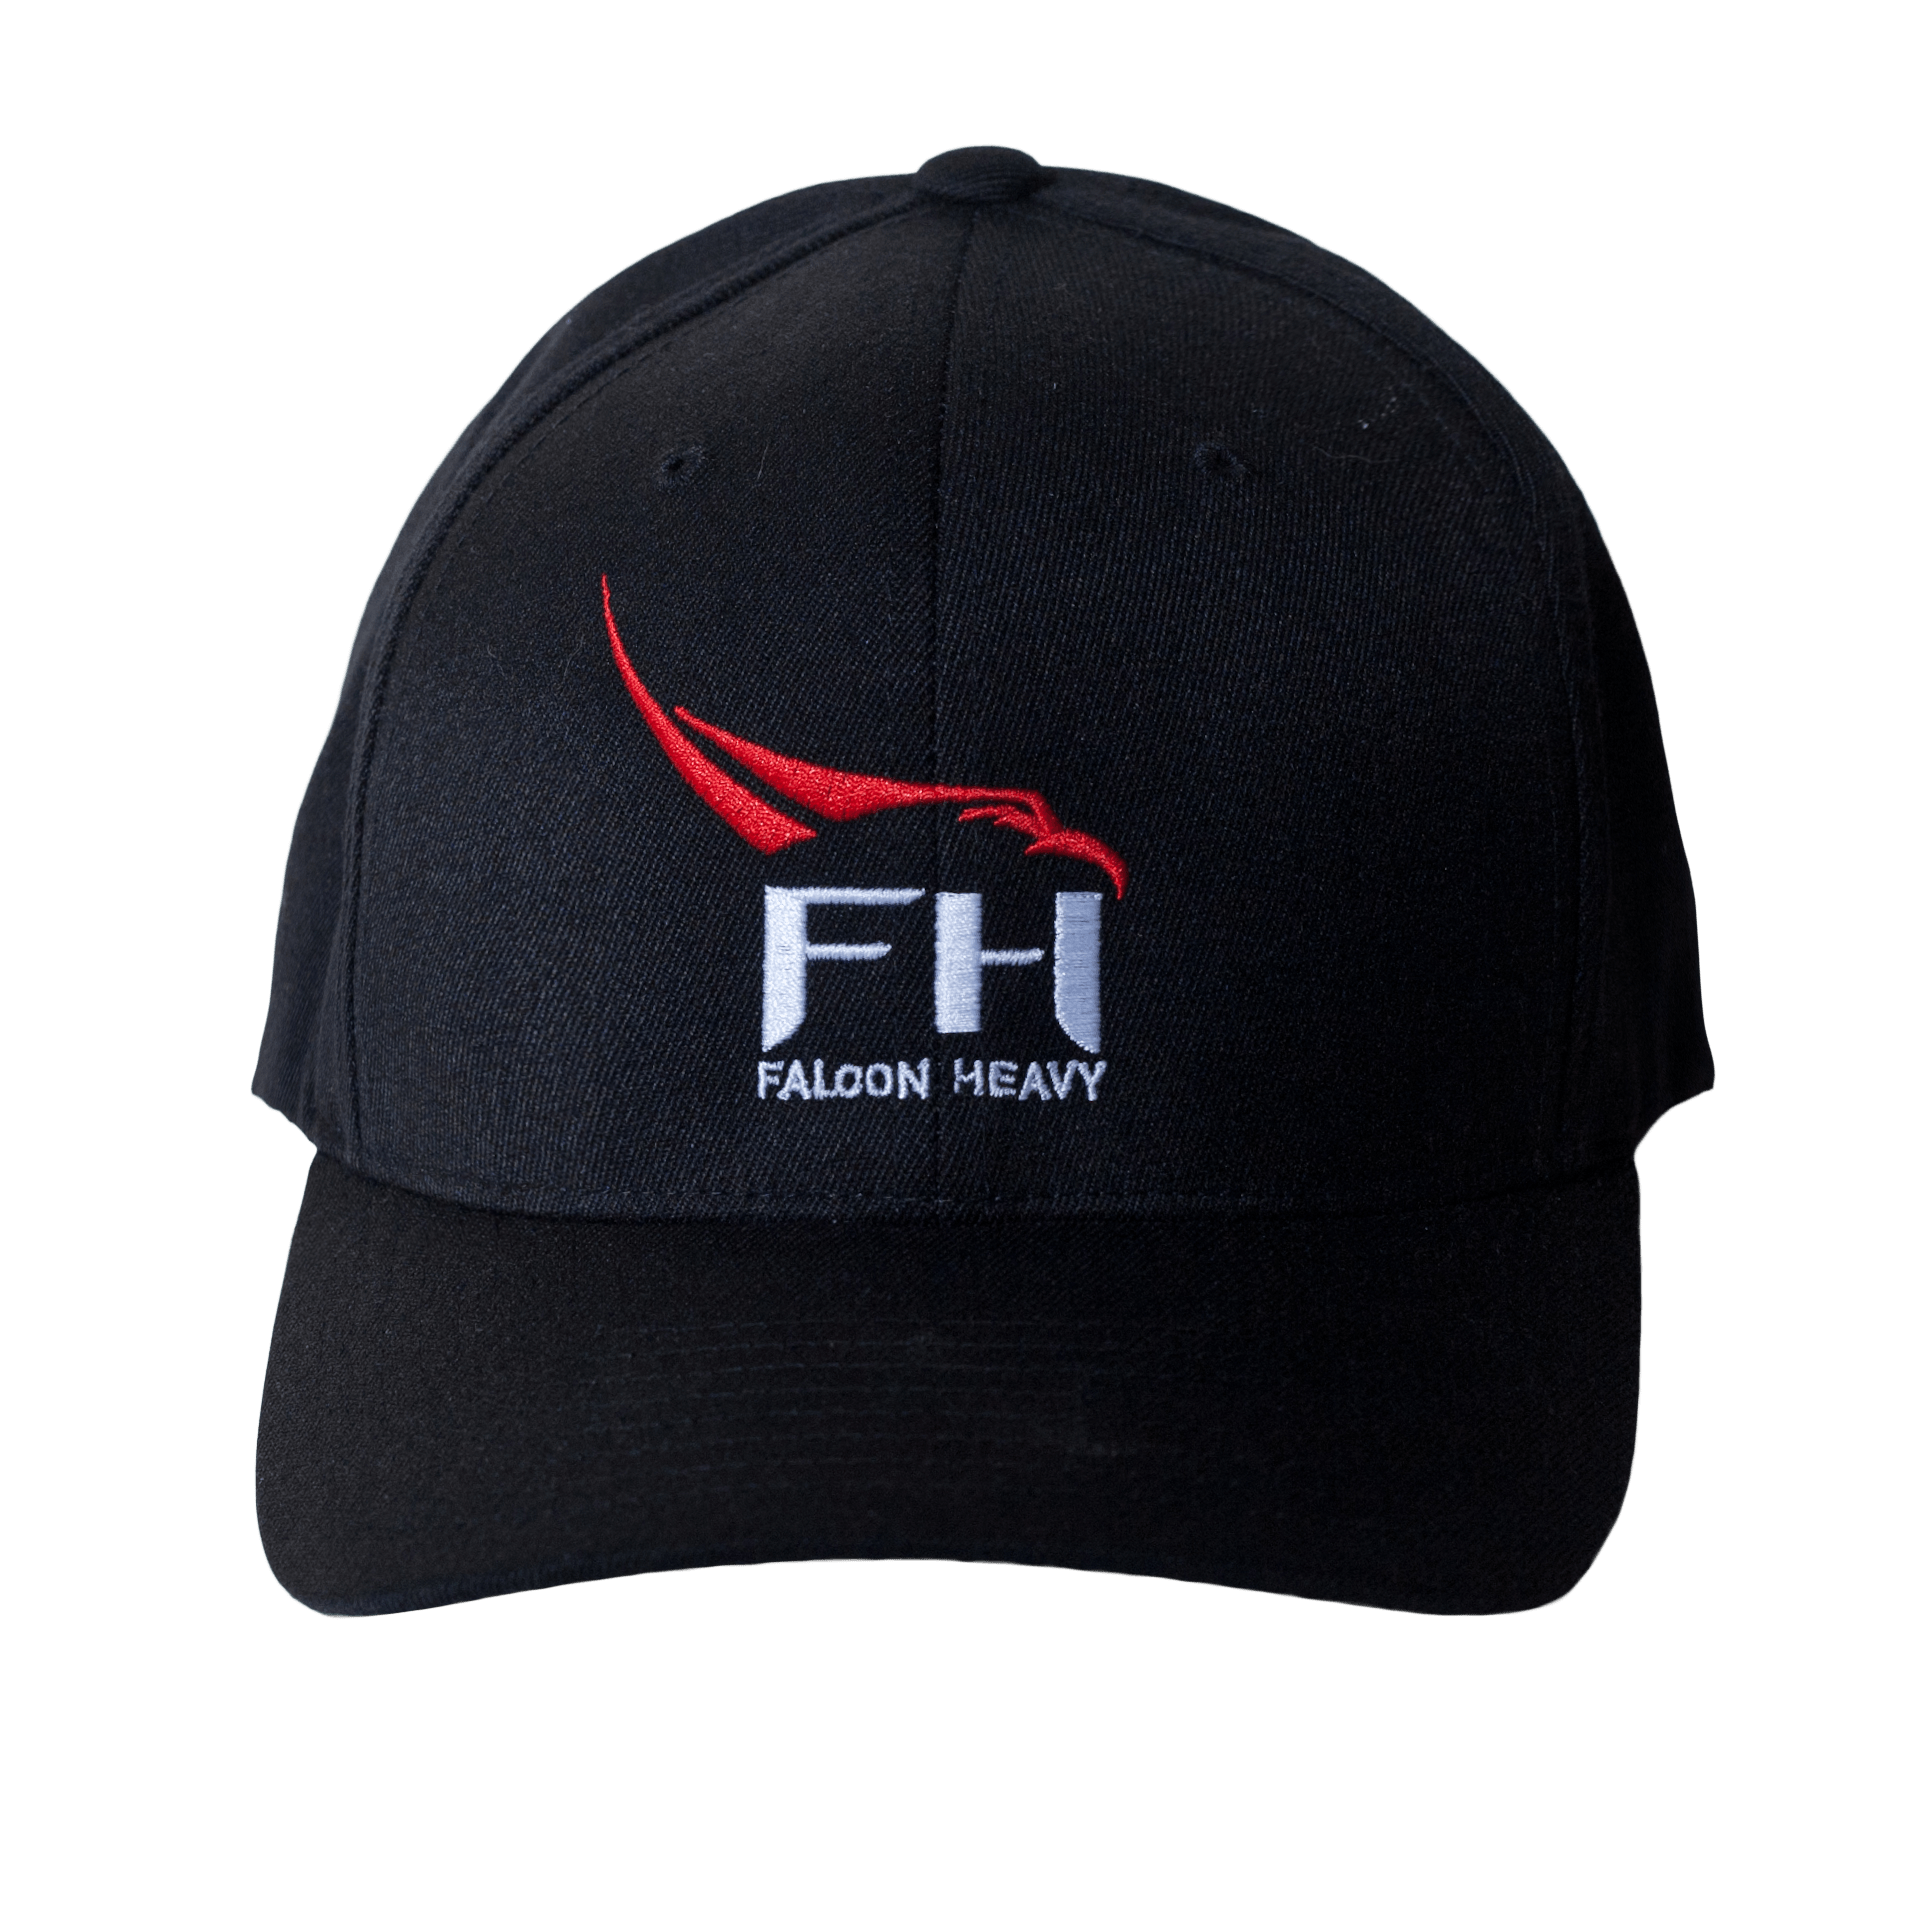 FH Falcon Heavy Logo - Shop SPACEX FALCON HEAVY FLEXFIT CAP Online from The Space Store